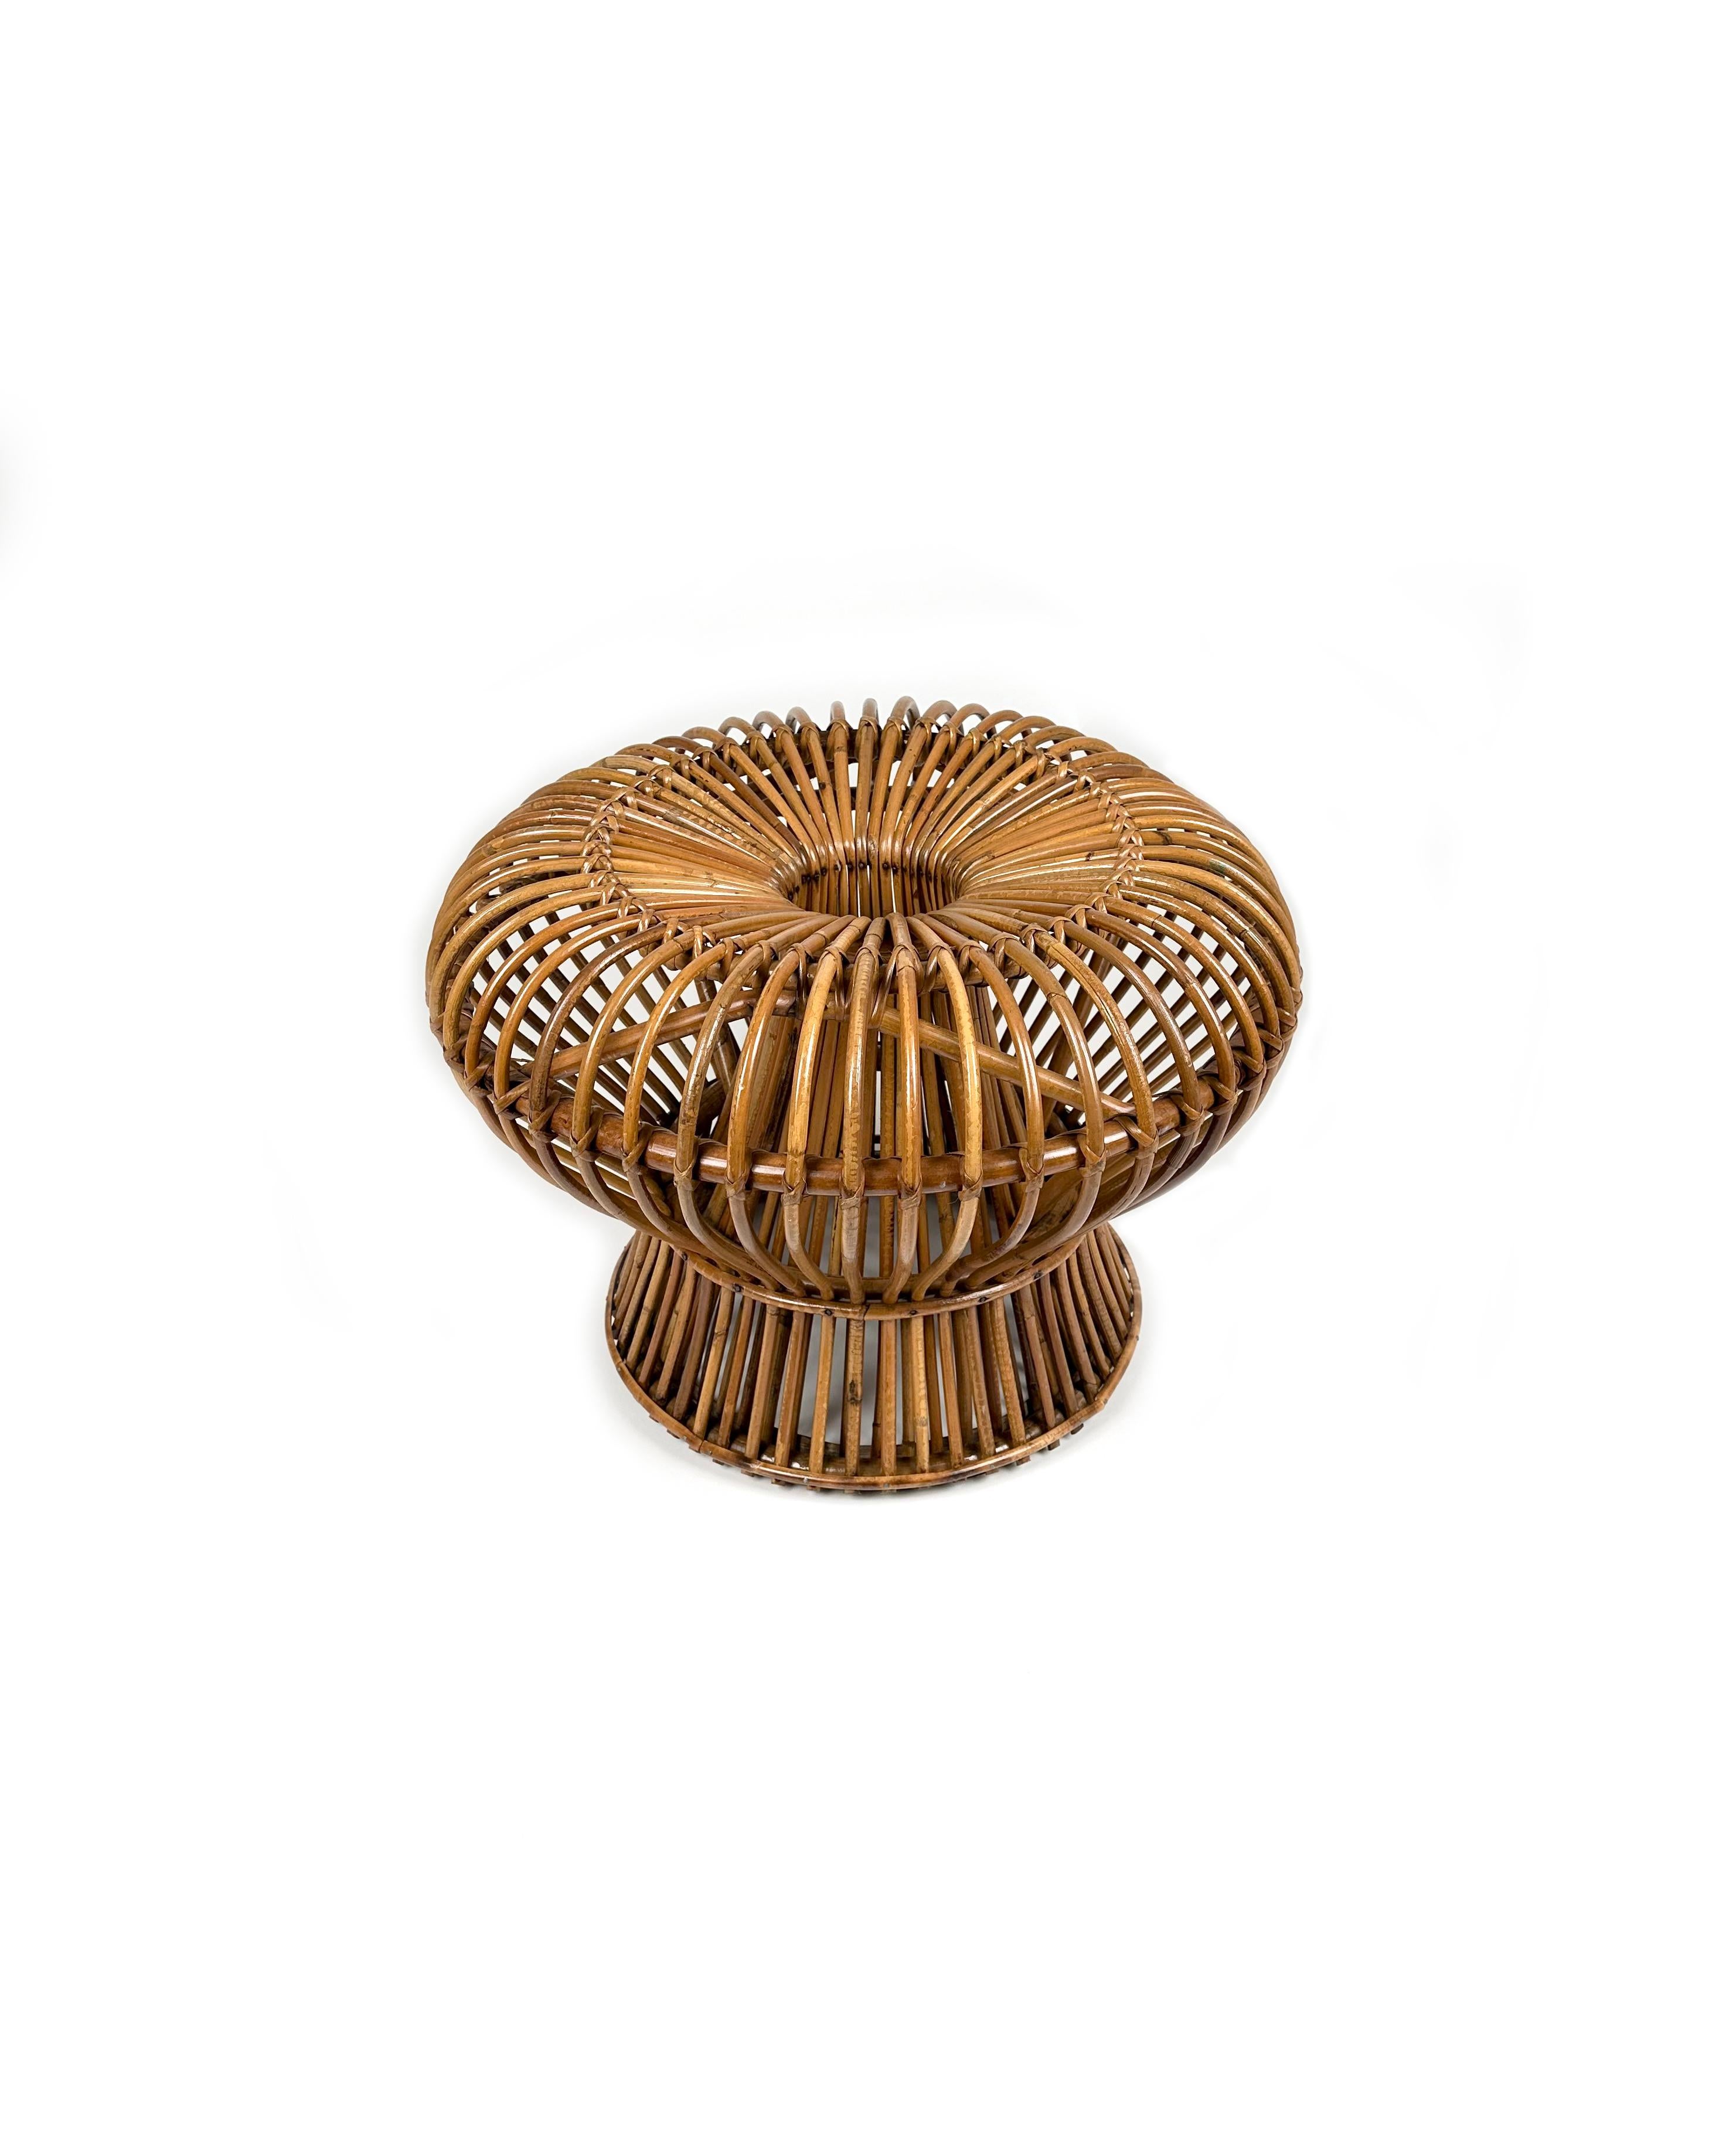 Italian Midcentury Ottoman Stool in Bamboo and Rattan Franco Albini Style, Italy, 1960s For Sale